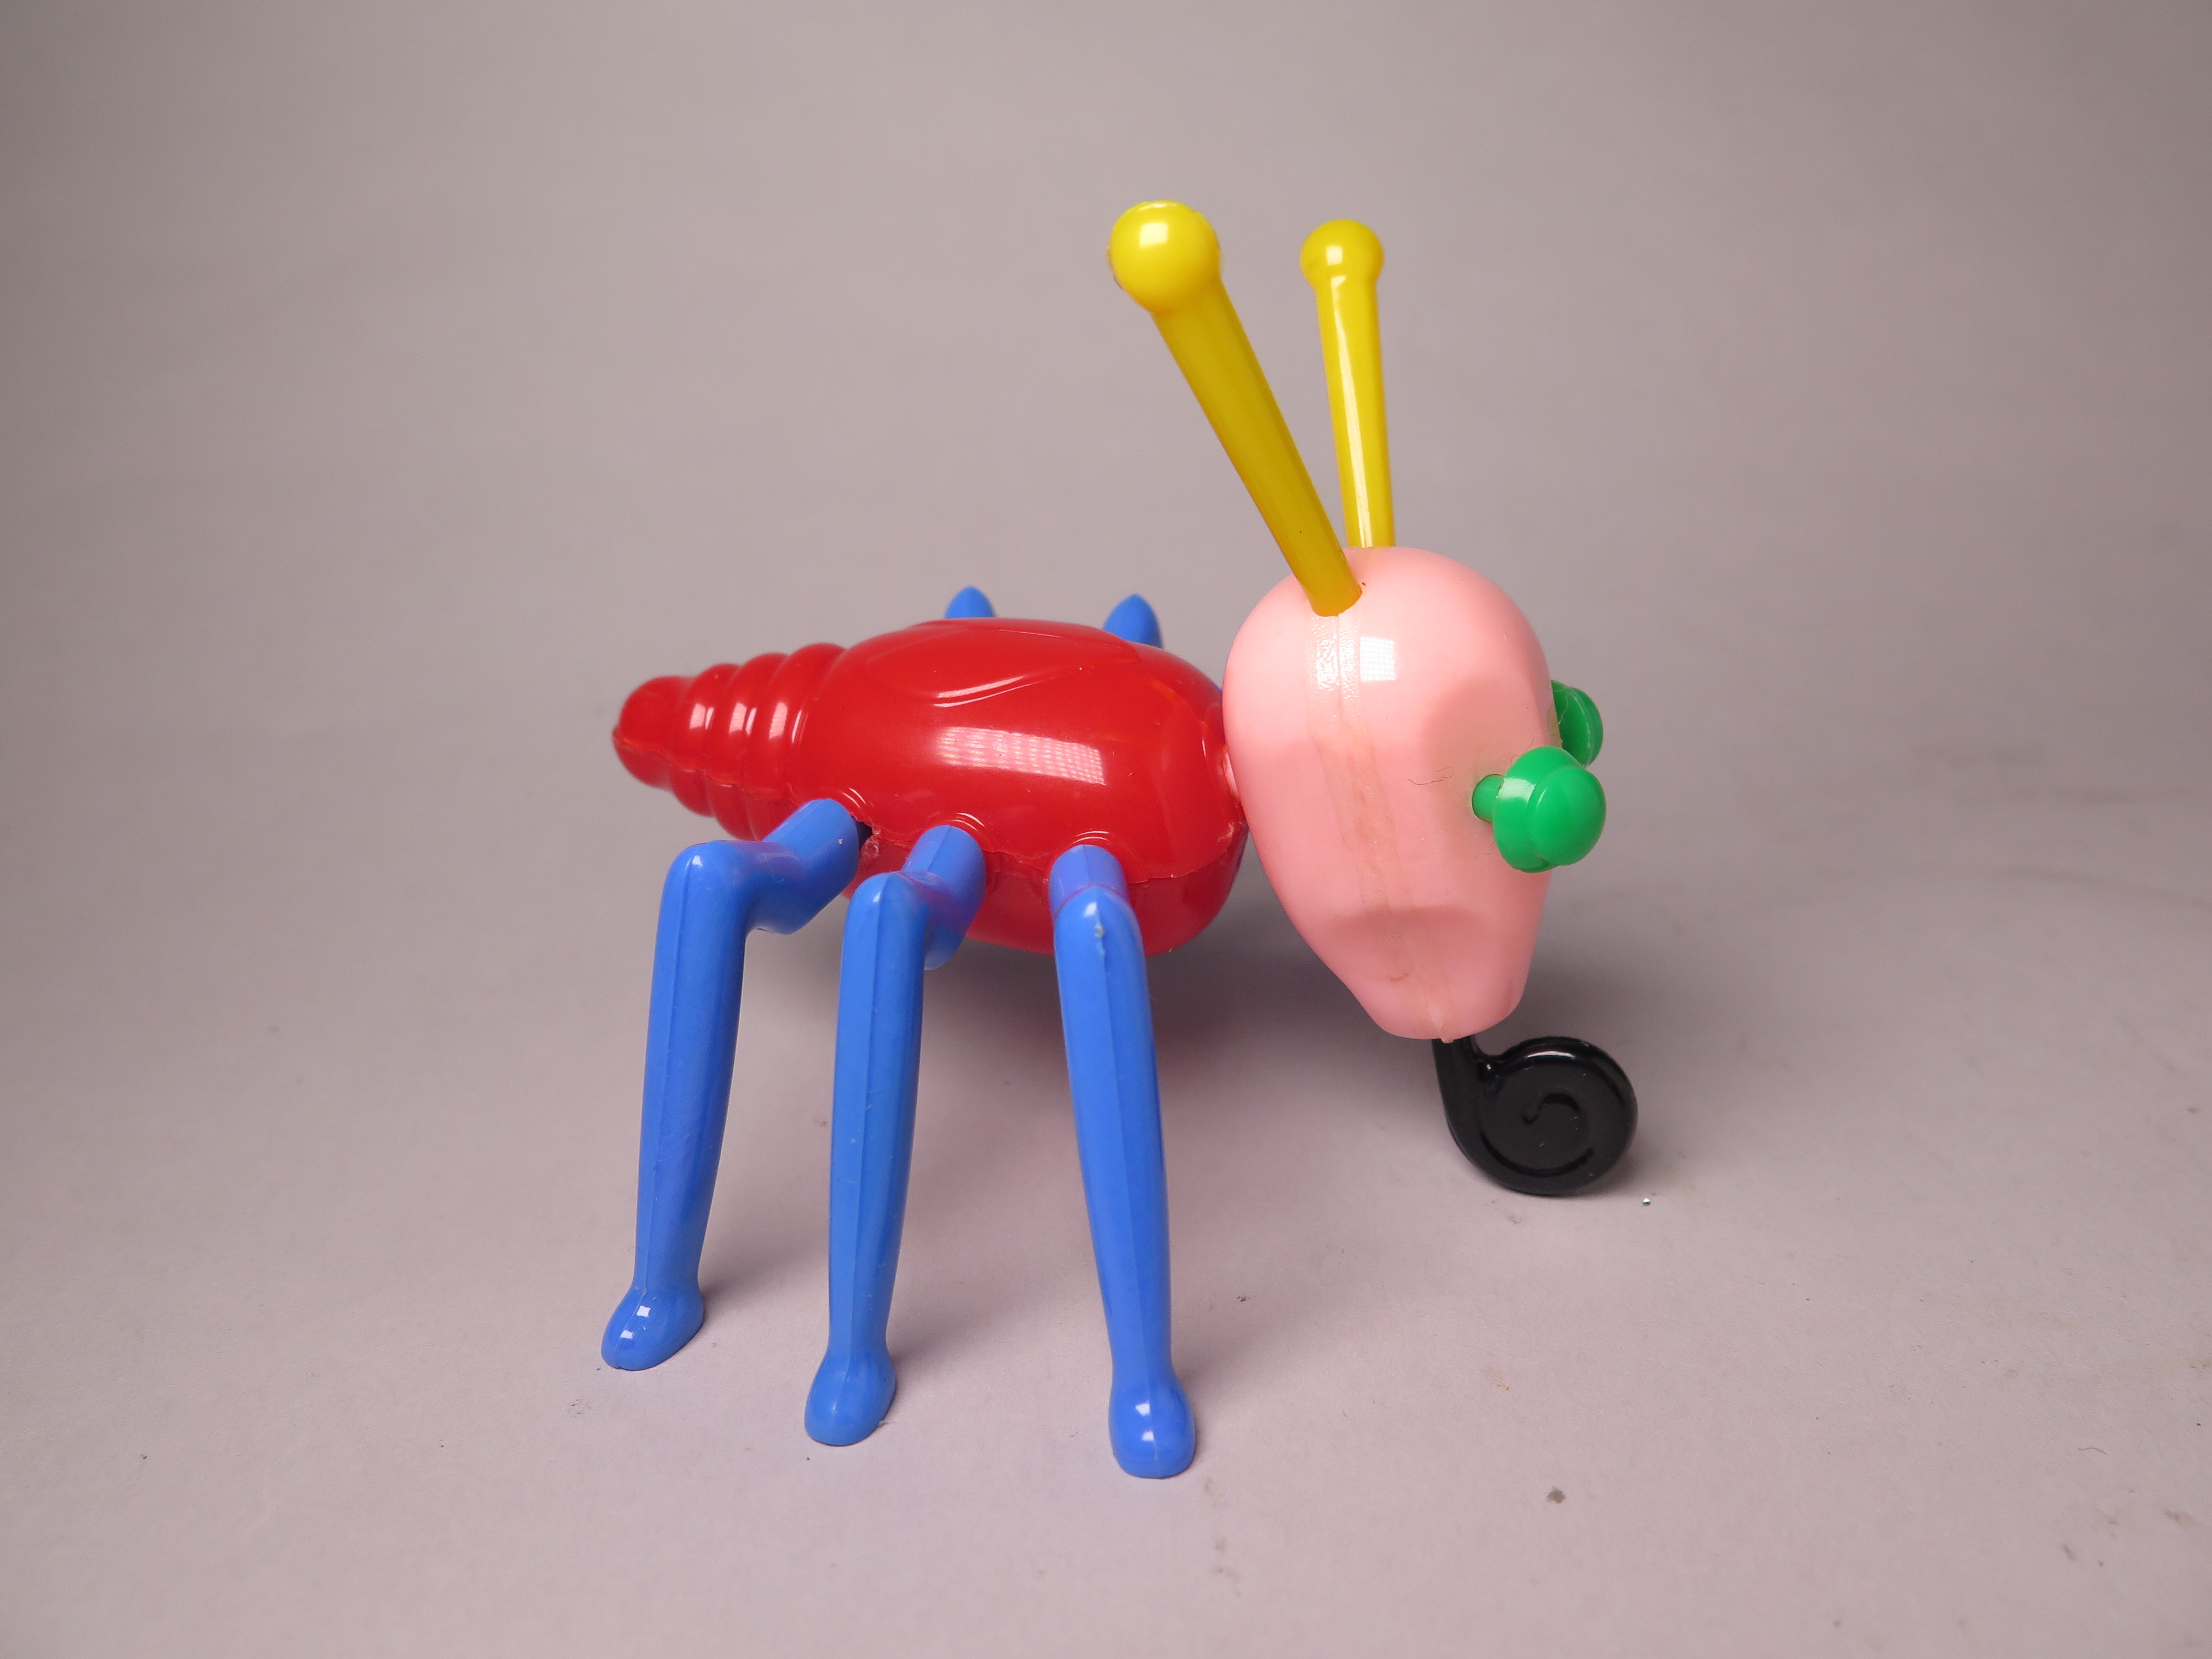 #1504 Plastic "Cootie" Bug from U.S.A., circa 1930s - 1940s **SOLD** September 2017